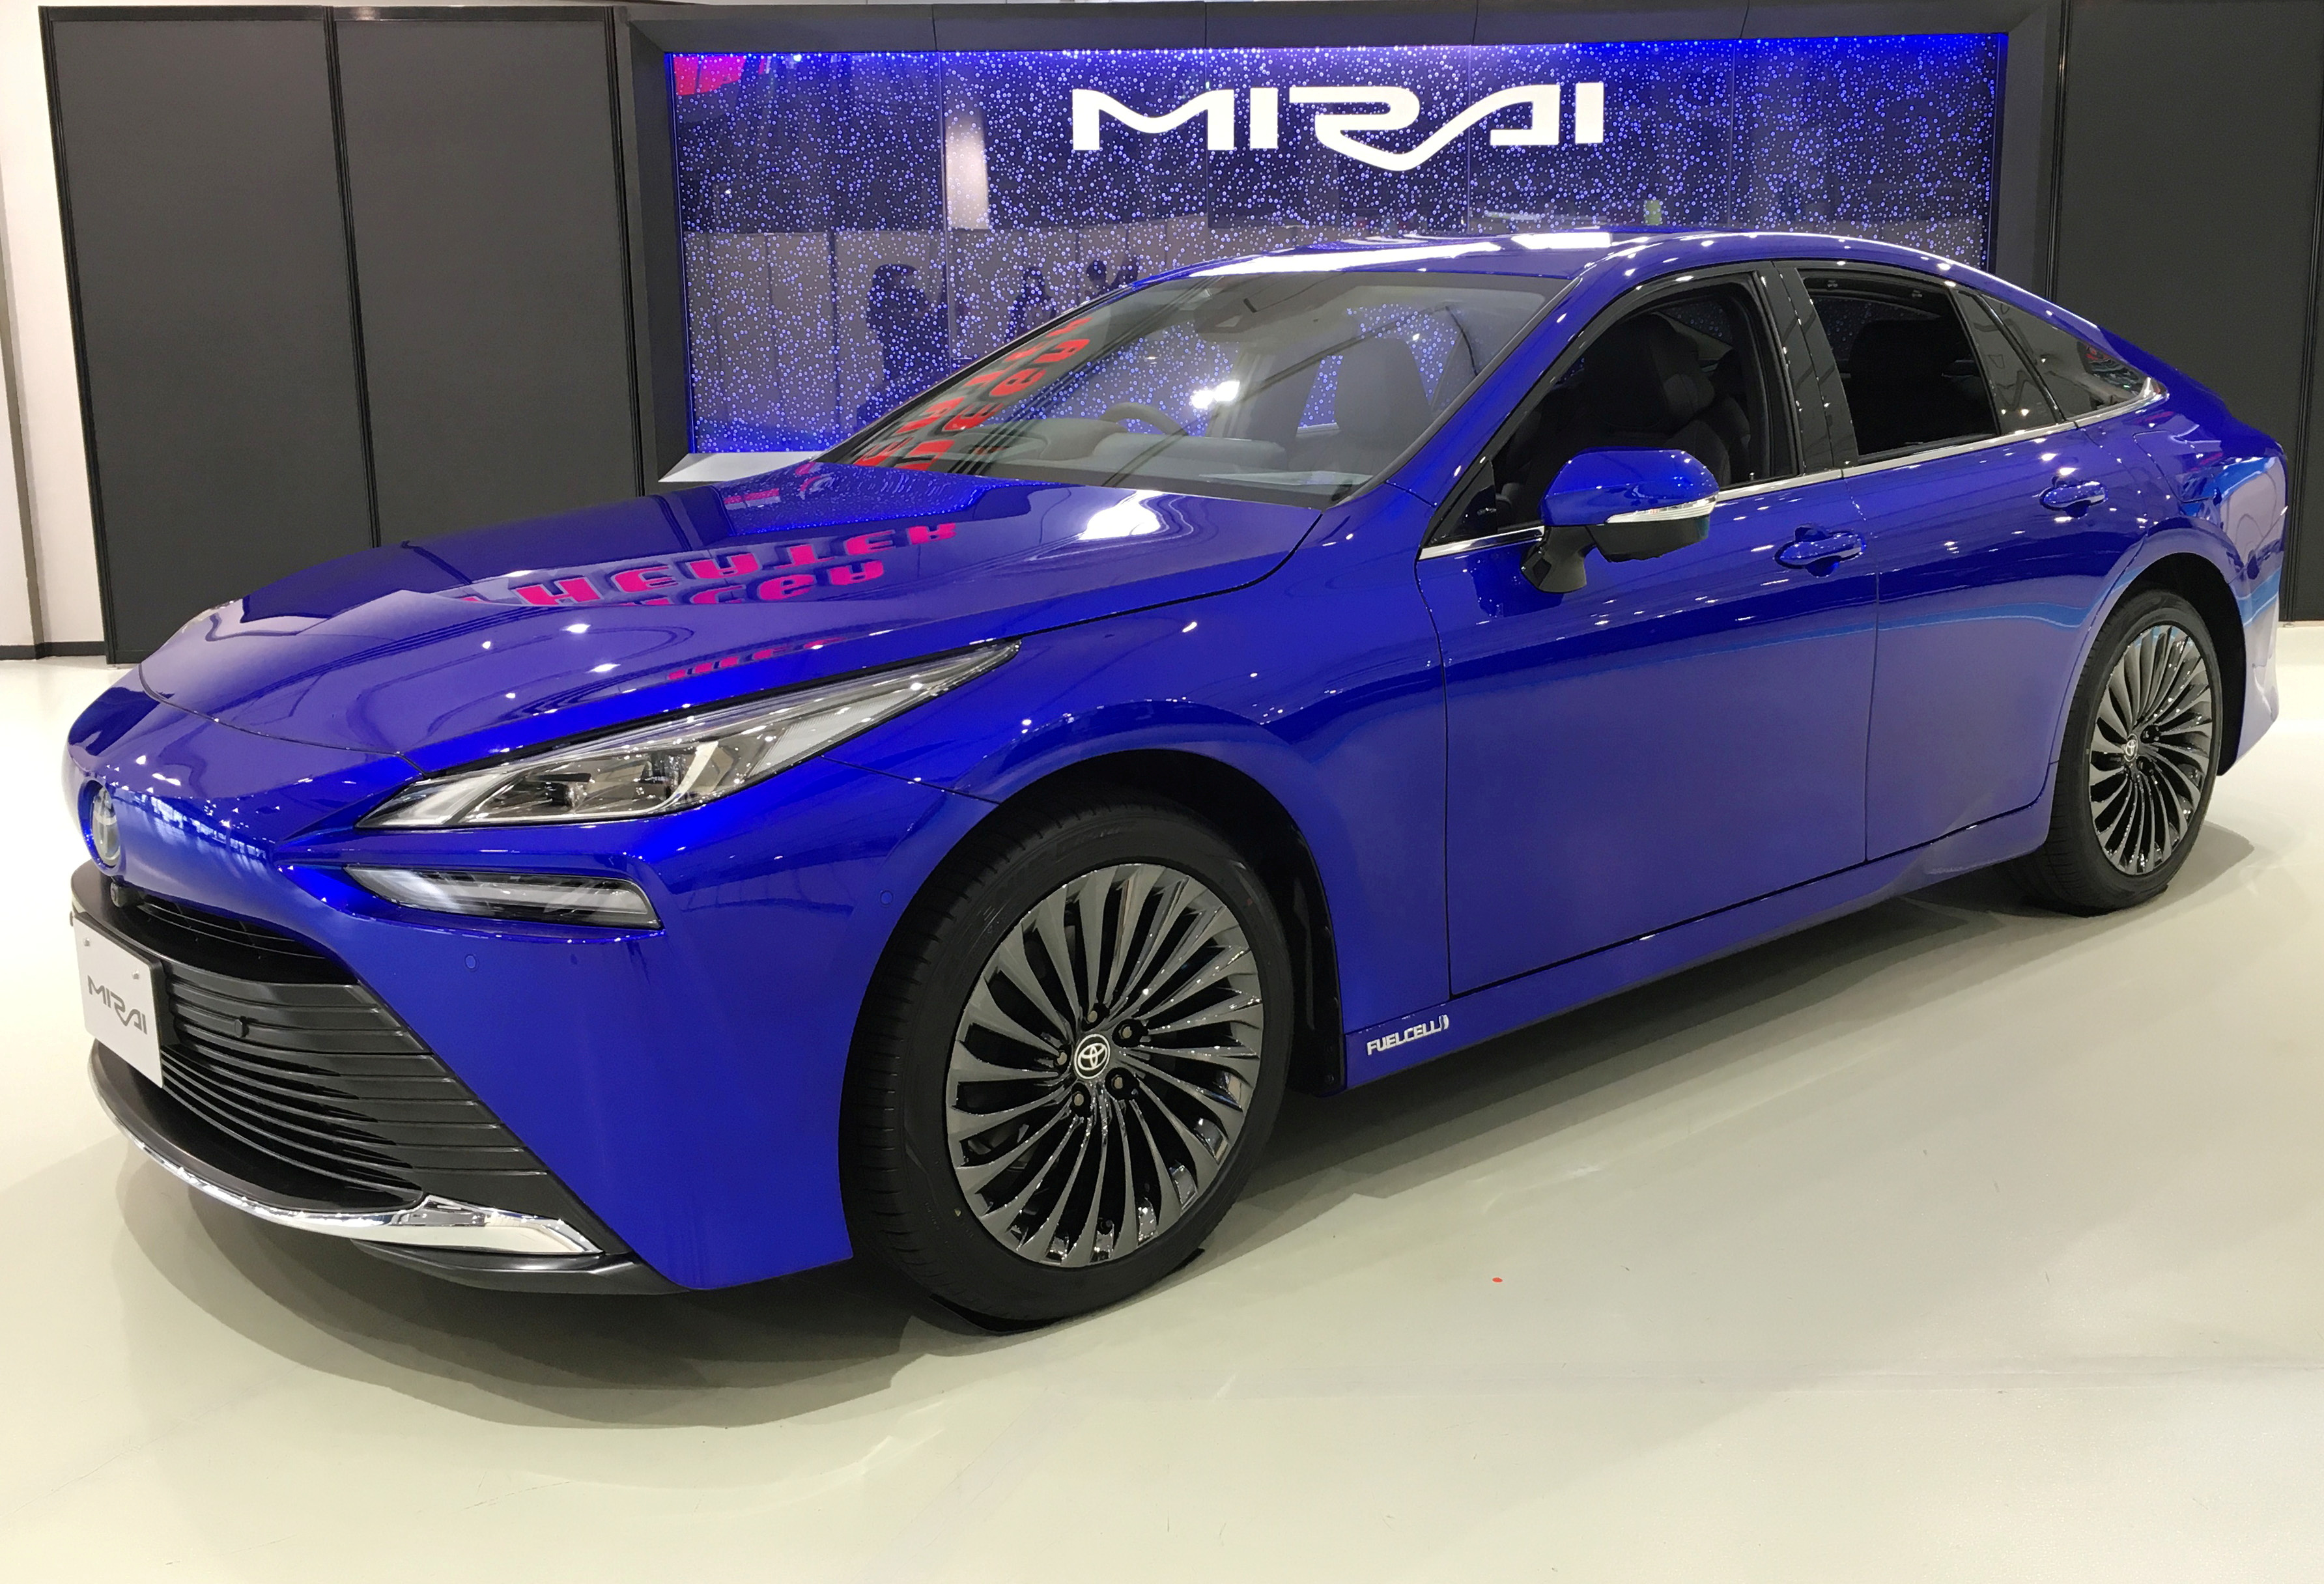 Toyota Motor Corp's revamped Mirai hydrogen fuel cell car is displayed at its launching event in Tokyo